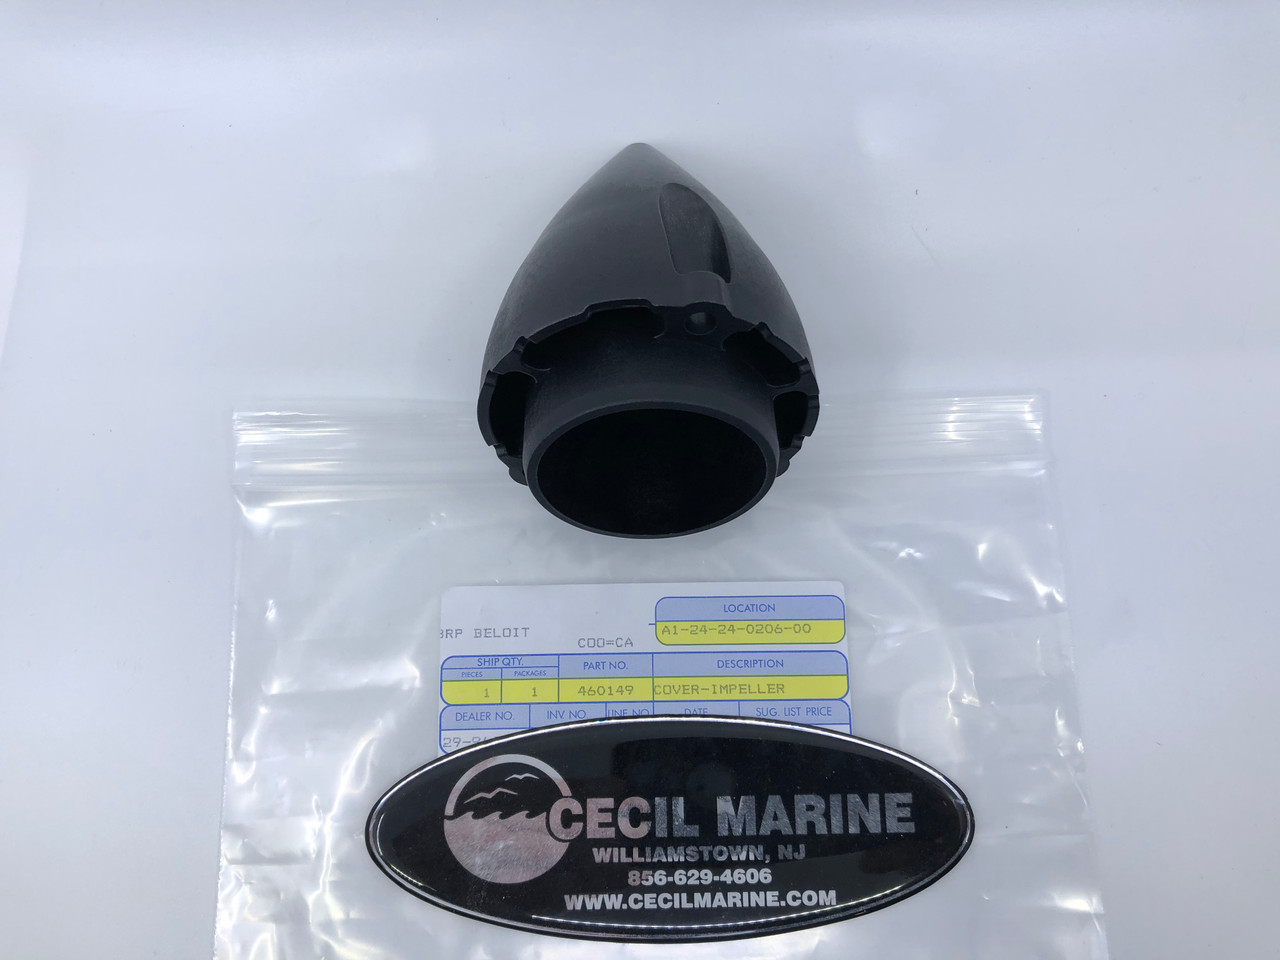 $26.95* GENUINE BRP IMPELLER COVER 460149 *In Stock & Ready To Ship!